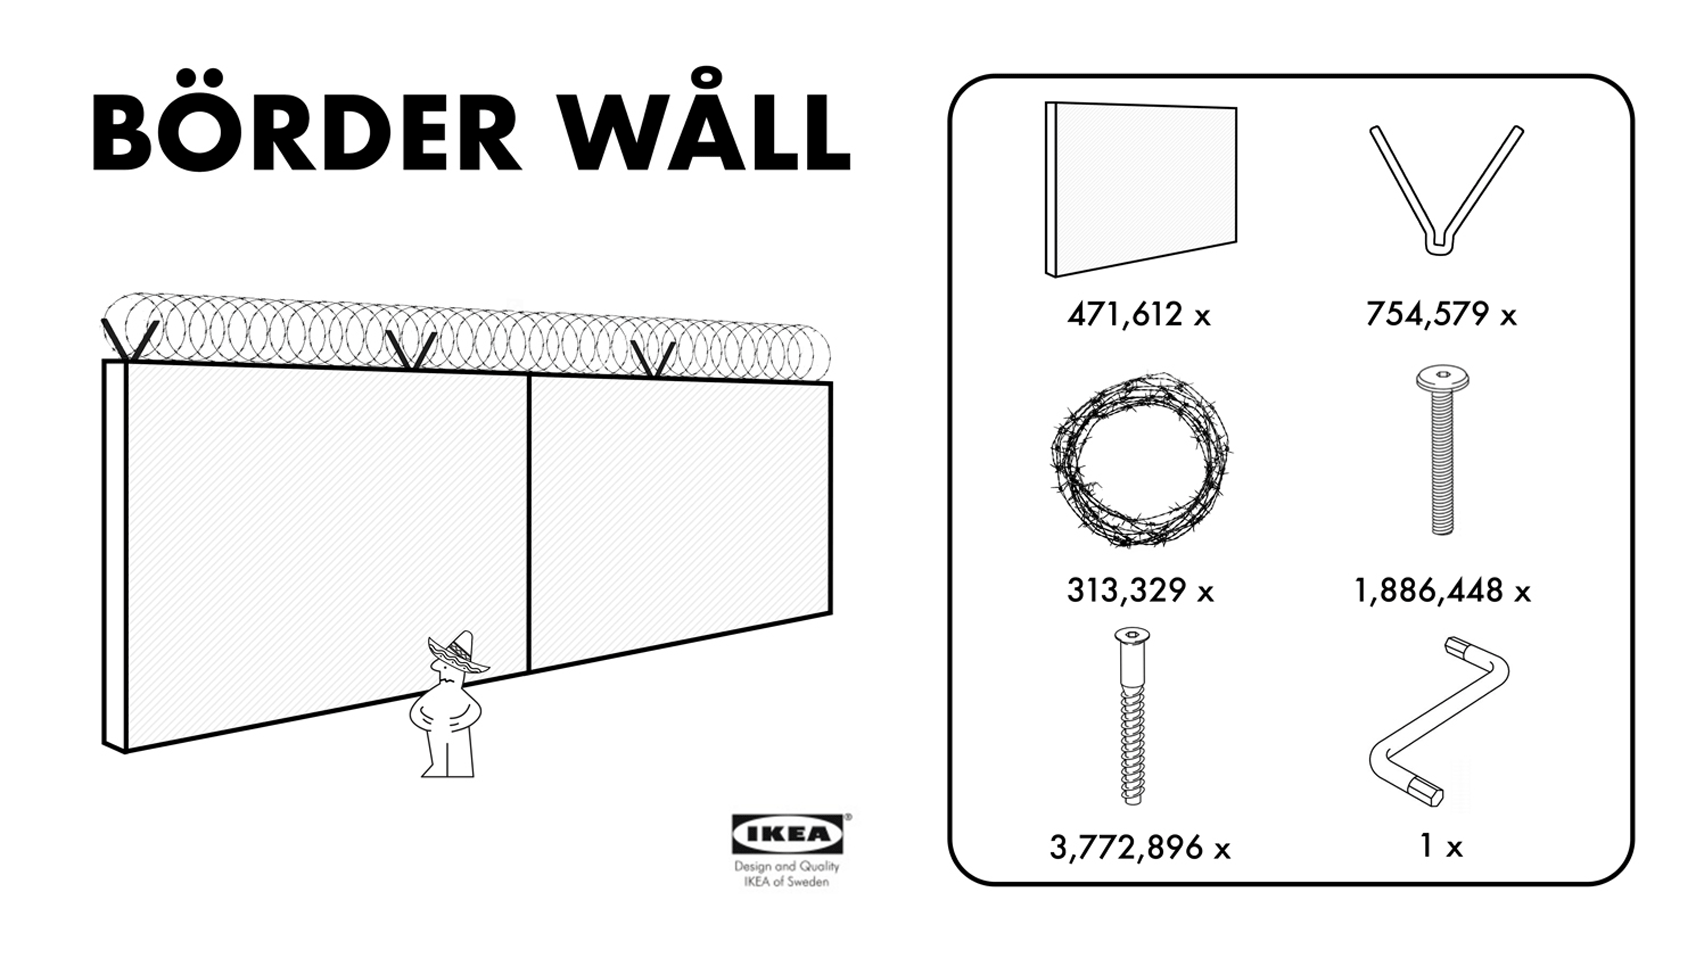 Seminarie James Dyson Verlichting IKEA Börder Wåll provides Trump with affordable construction option